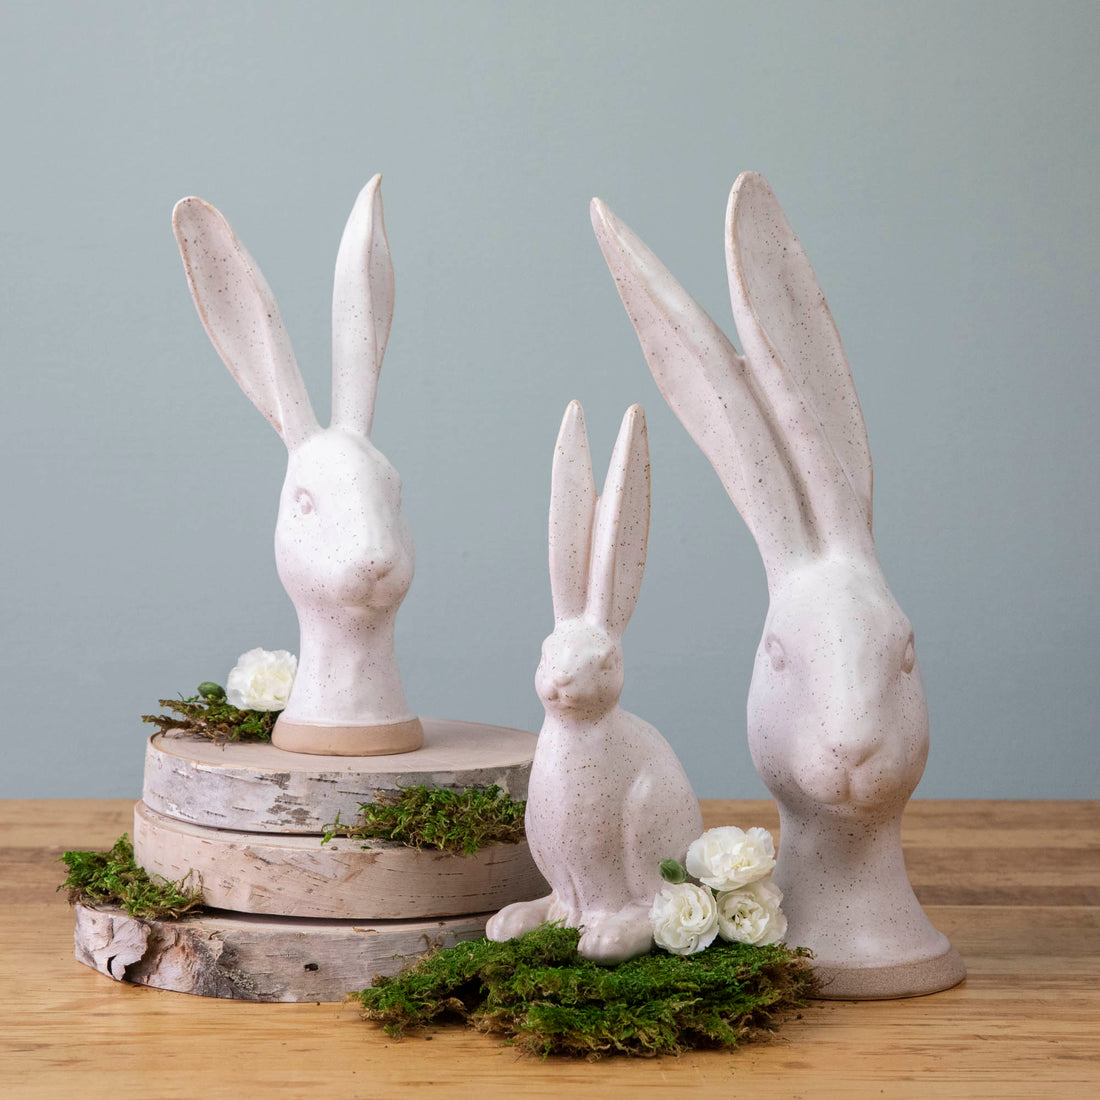 Three enchanting HomArt Matte White Ceramic Hares, ceramic rabbit heads on top of a wooden table.